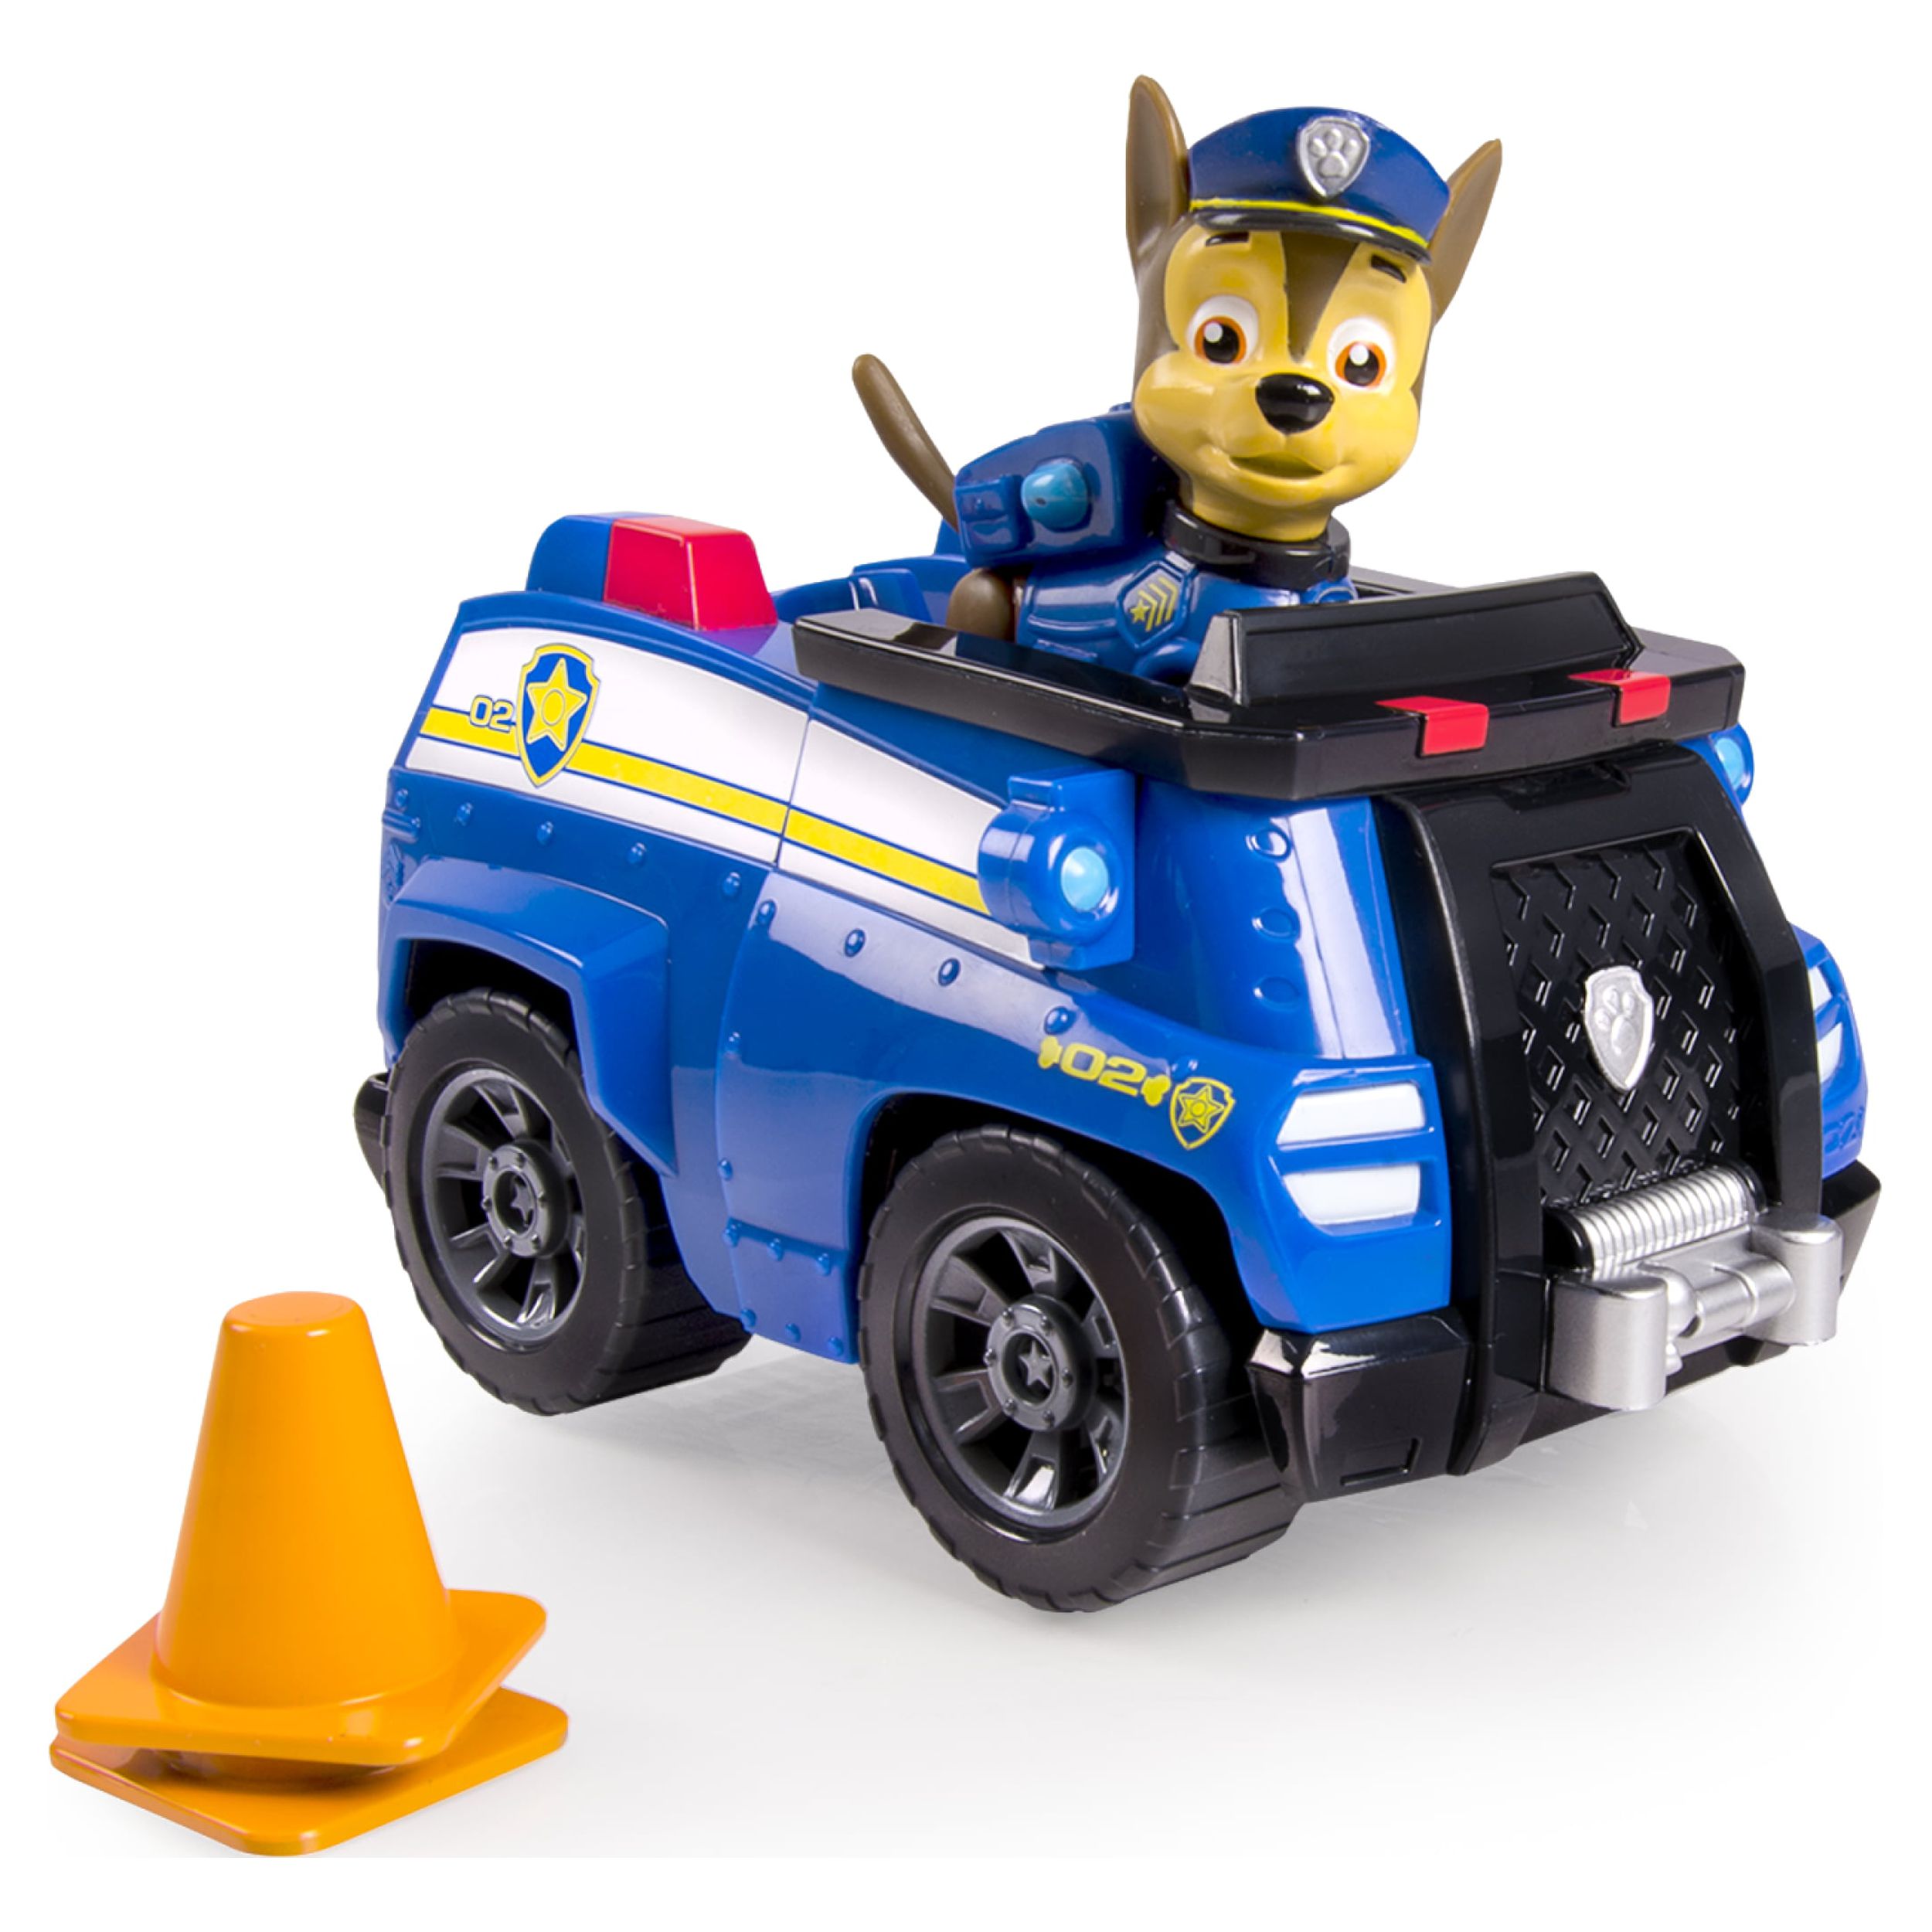 Paw Patrol Chase's Cruiser, Vehicle and Figure - image 5 of 6